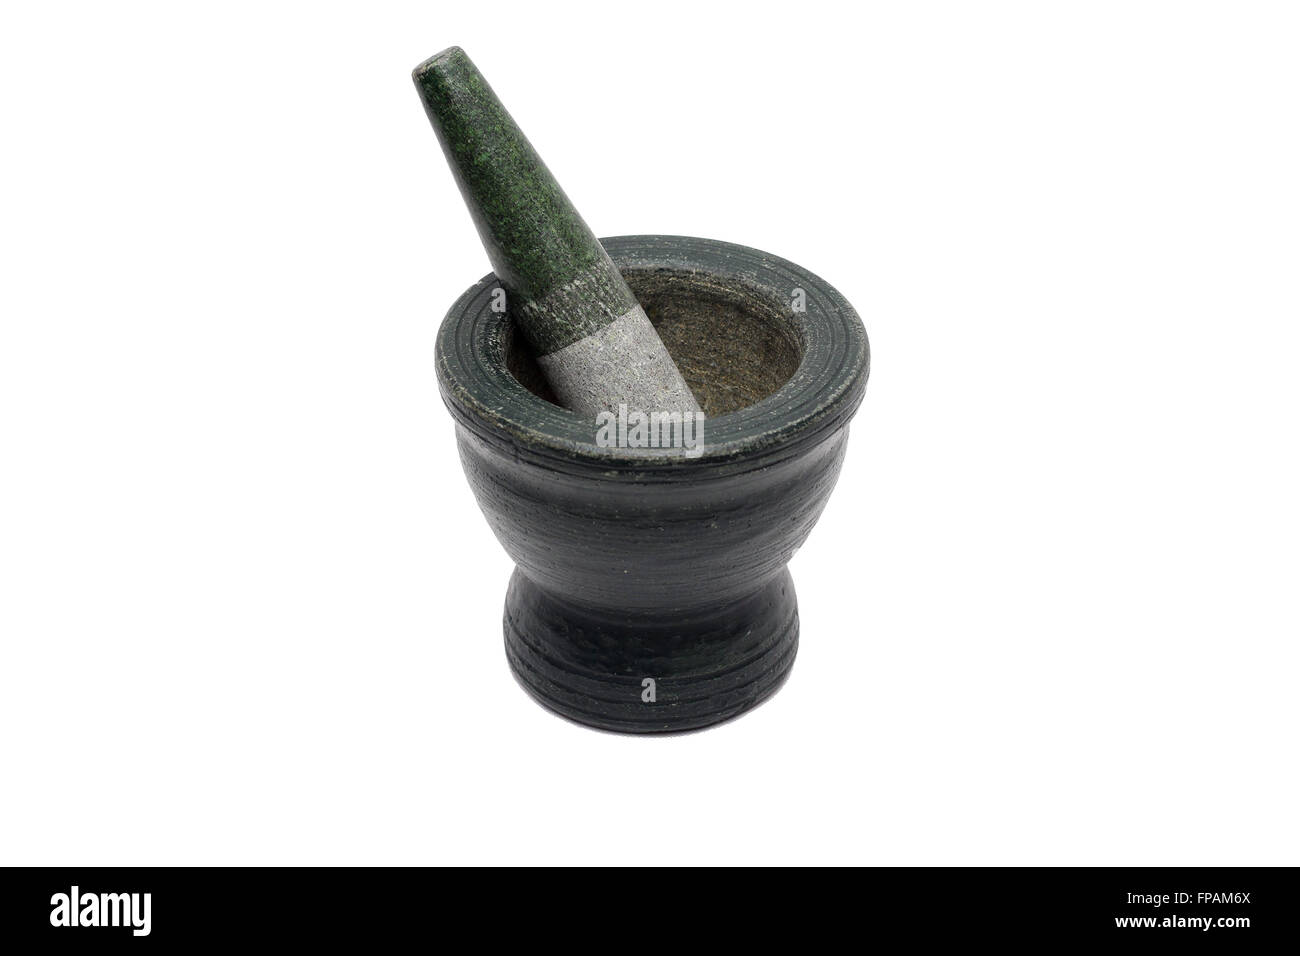 Granite mortar and pestle. Isolated on white background Stock Photo